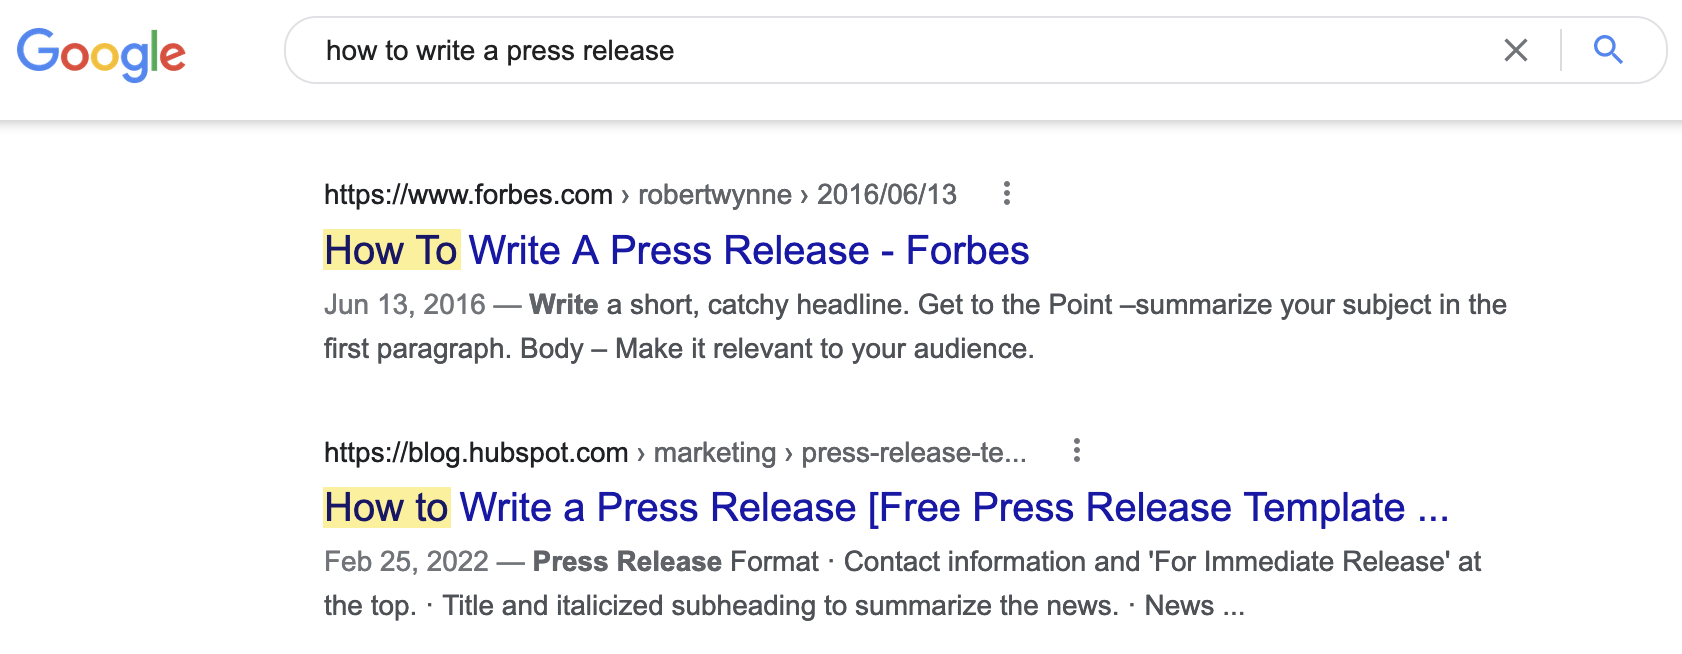 People searching for "how to write a press release" clearly want a step-by-step guide
